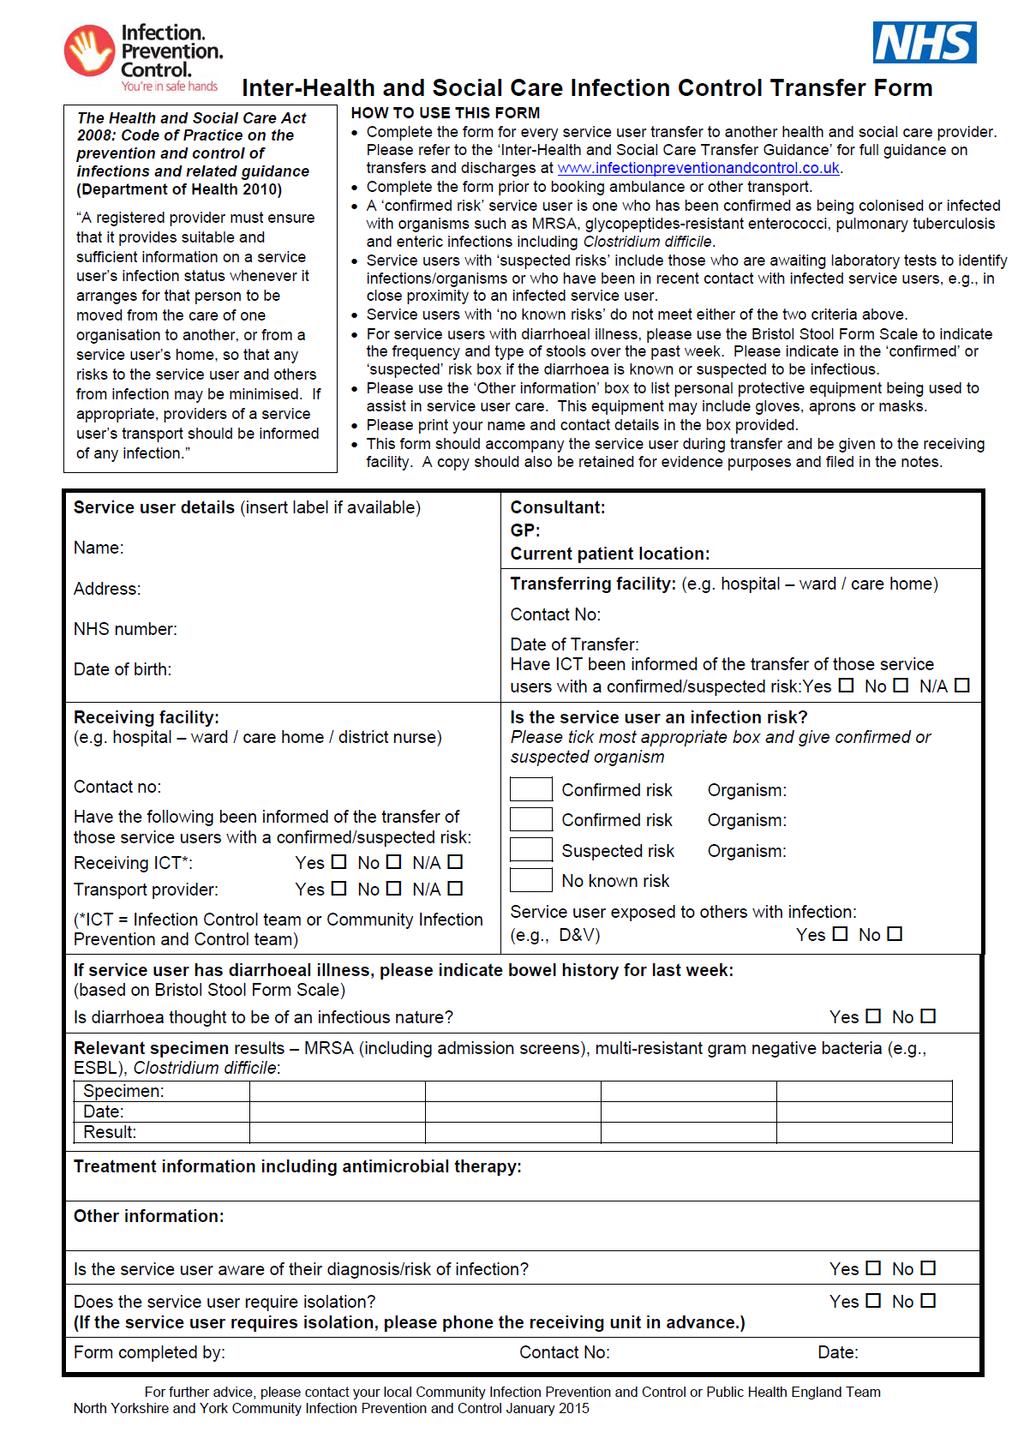 Appendix 1: Inter-Health and Social Care Infection Control Transfer Form Cumbria County